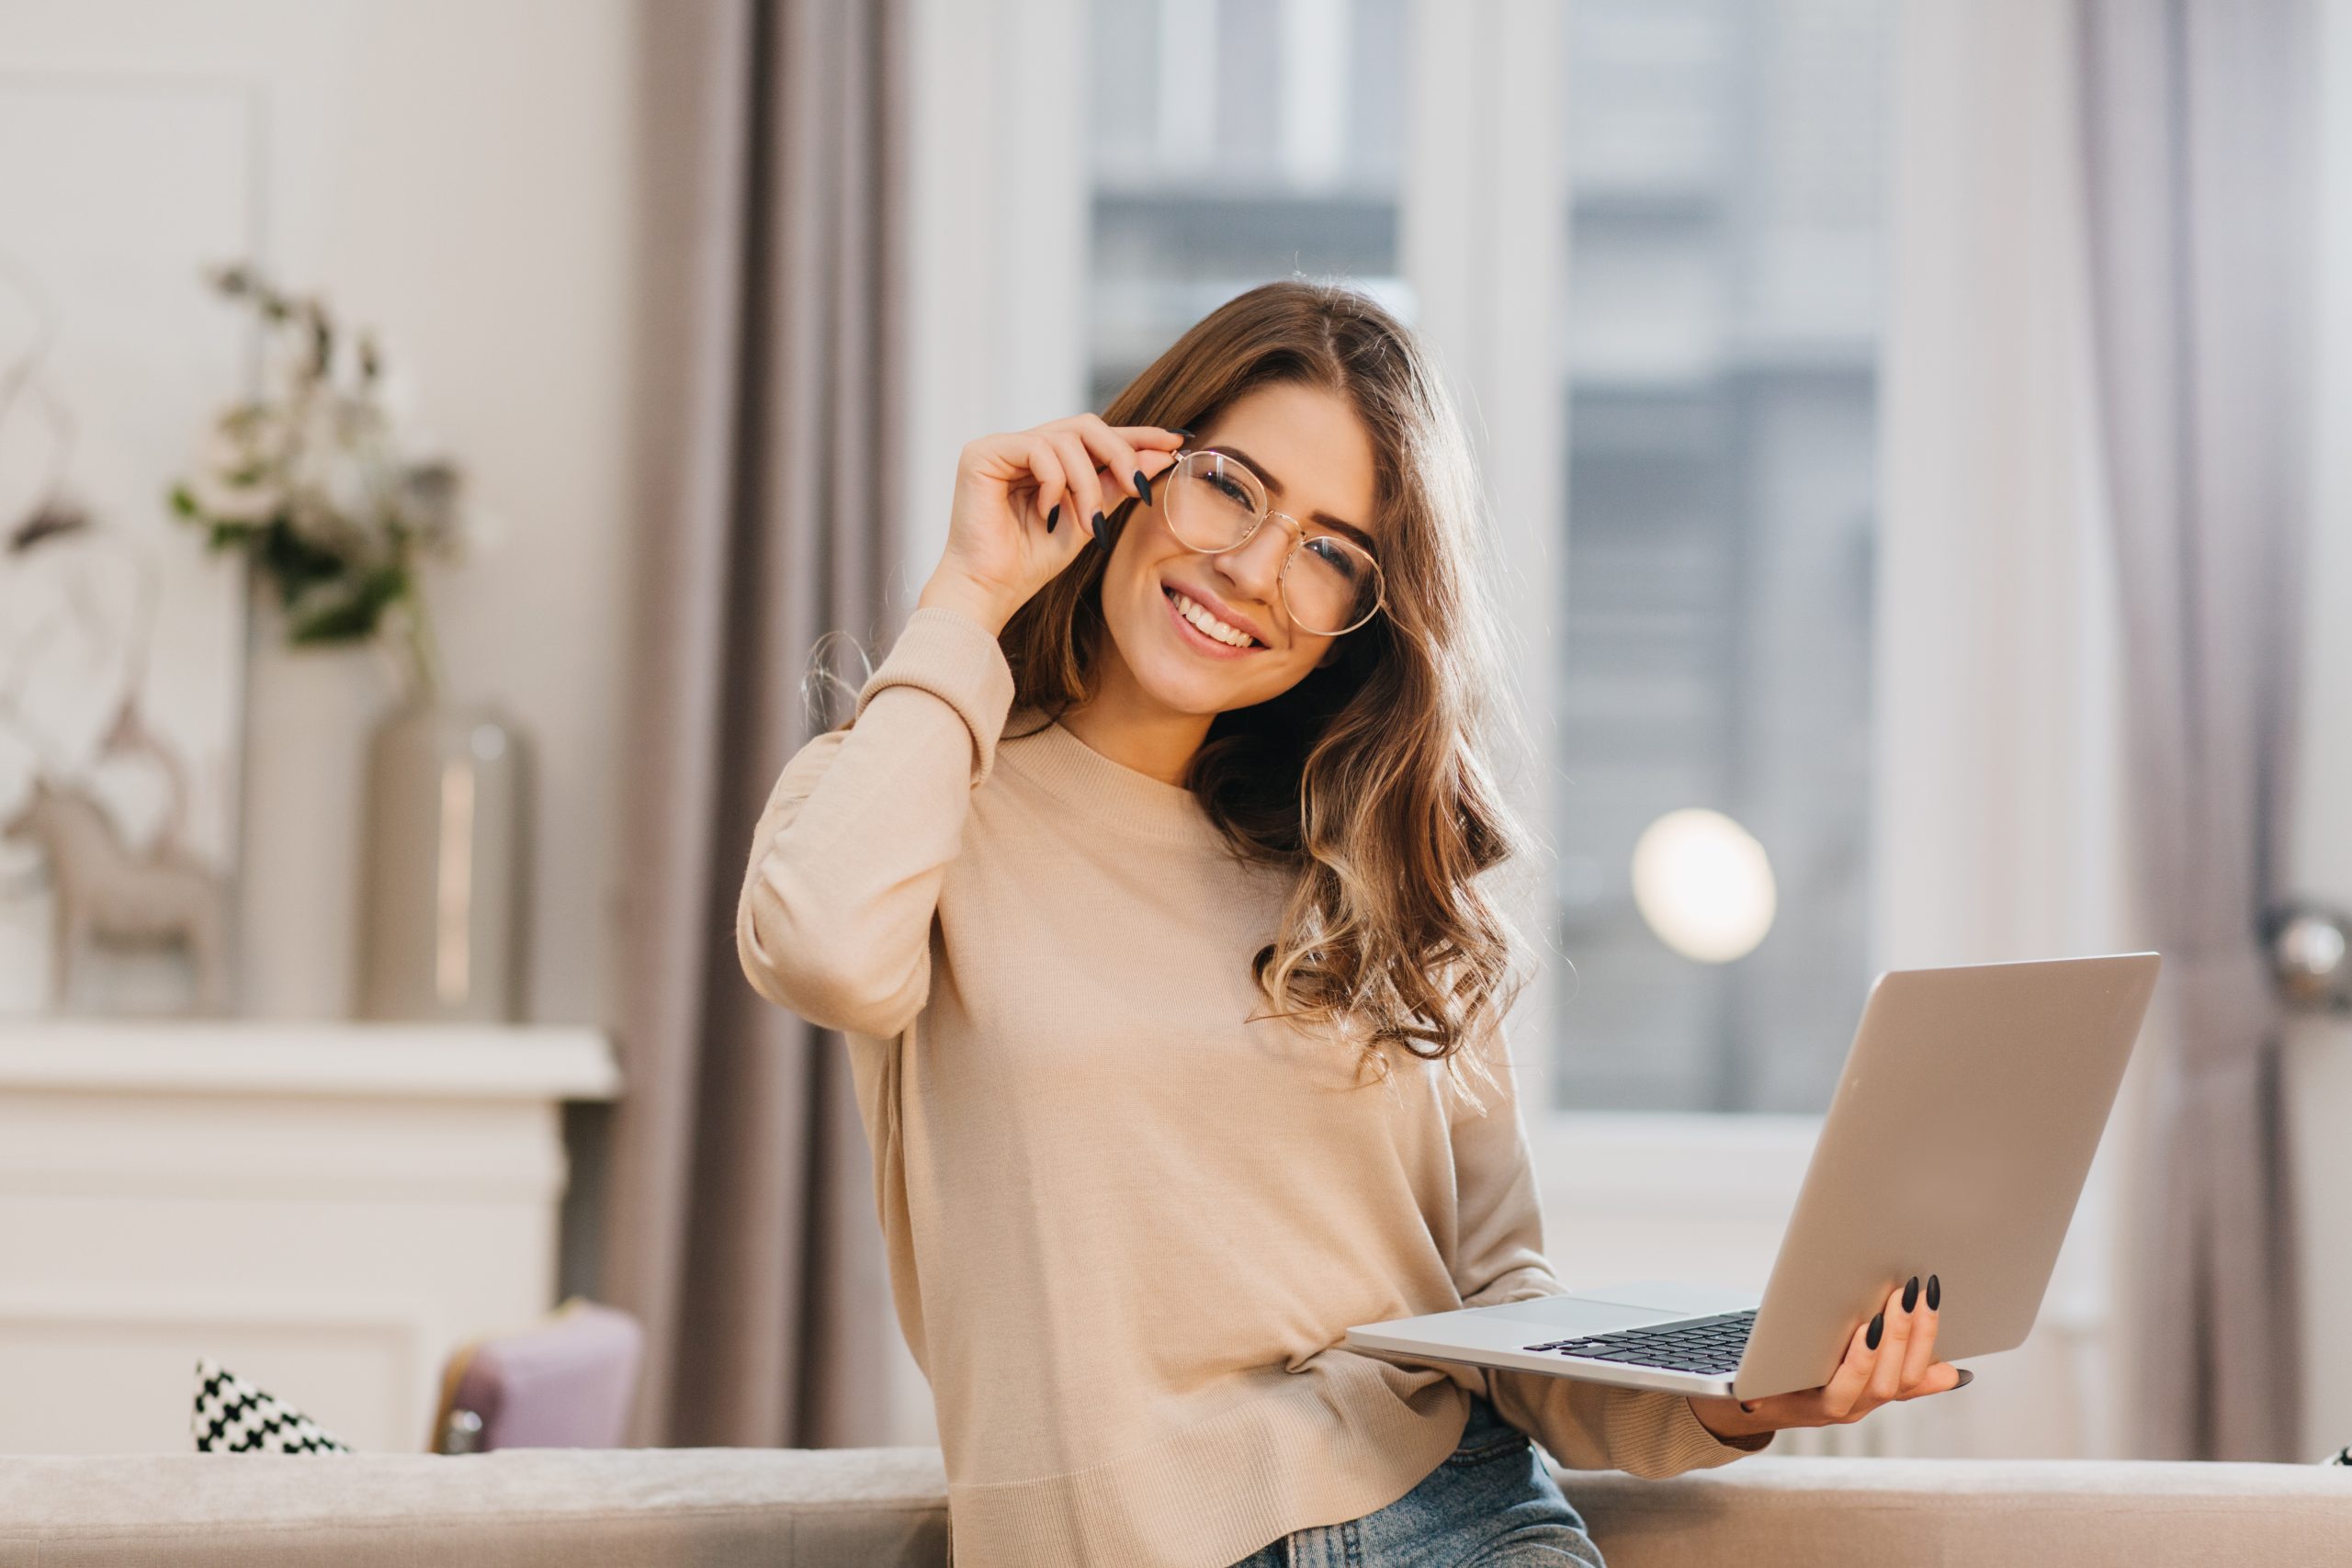 cute-girl-in-beige-shirt-touching-glasses-and-holding-laptop-with-smile-indoor-photo-of-beautiful-female-student-preparing-for-lesson-with-computer-at-home